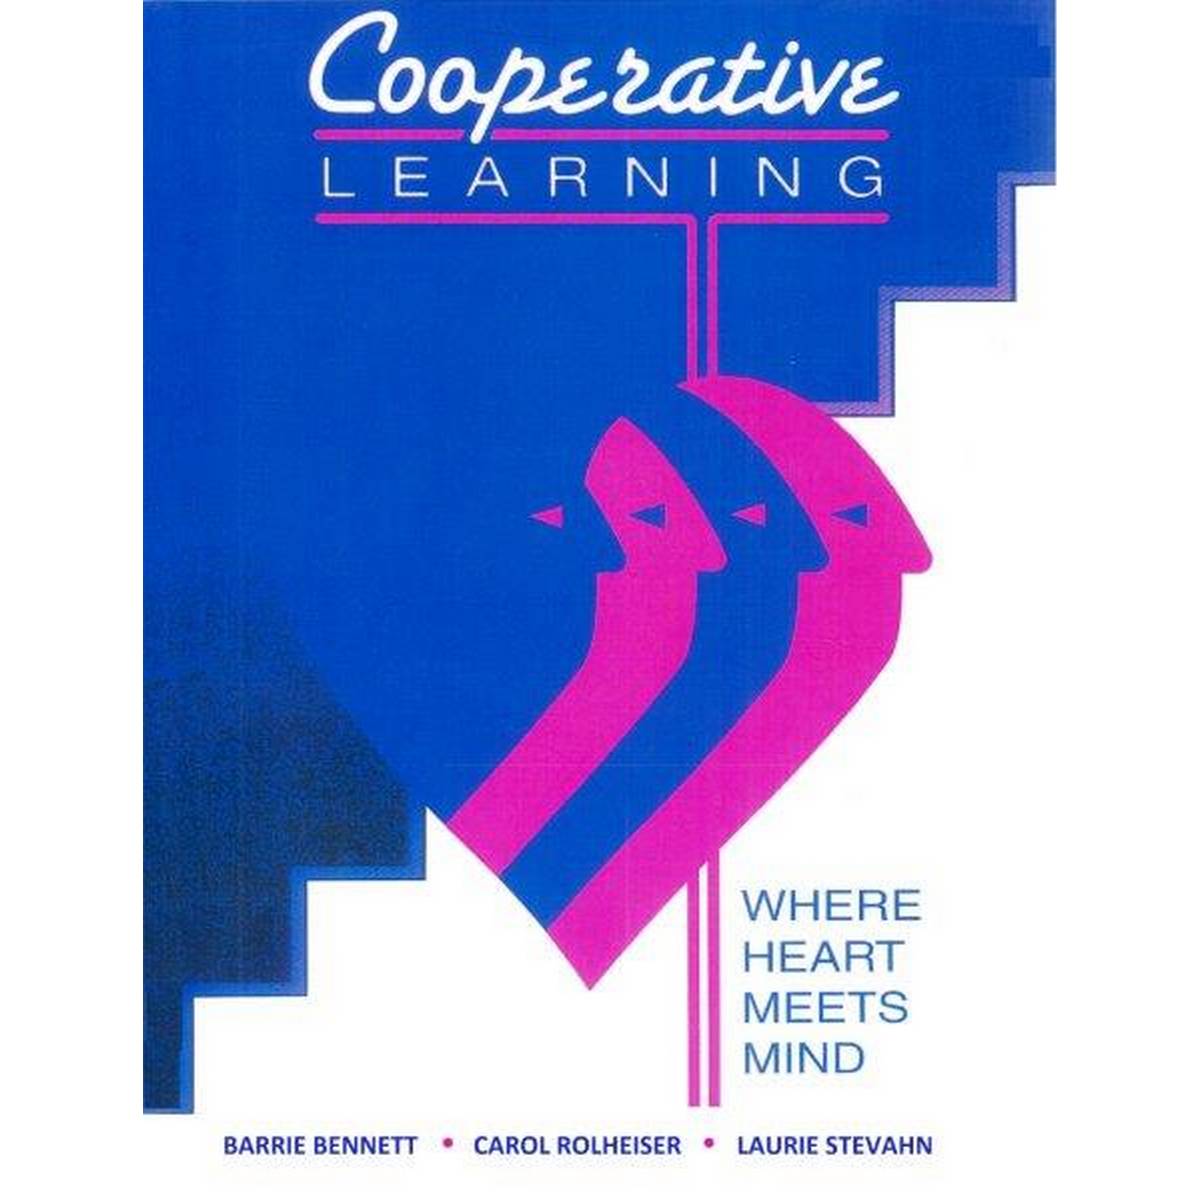 Cooperative Learning: Where Heart Meets Mind